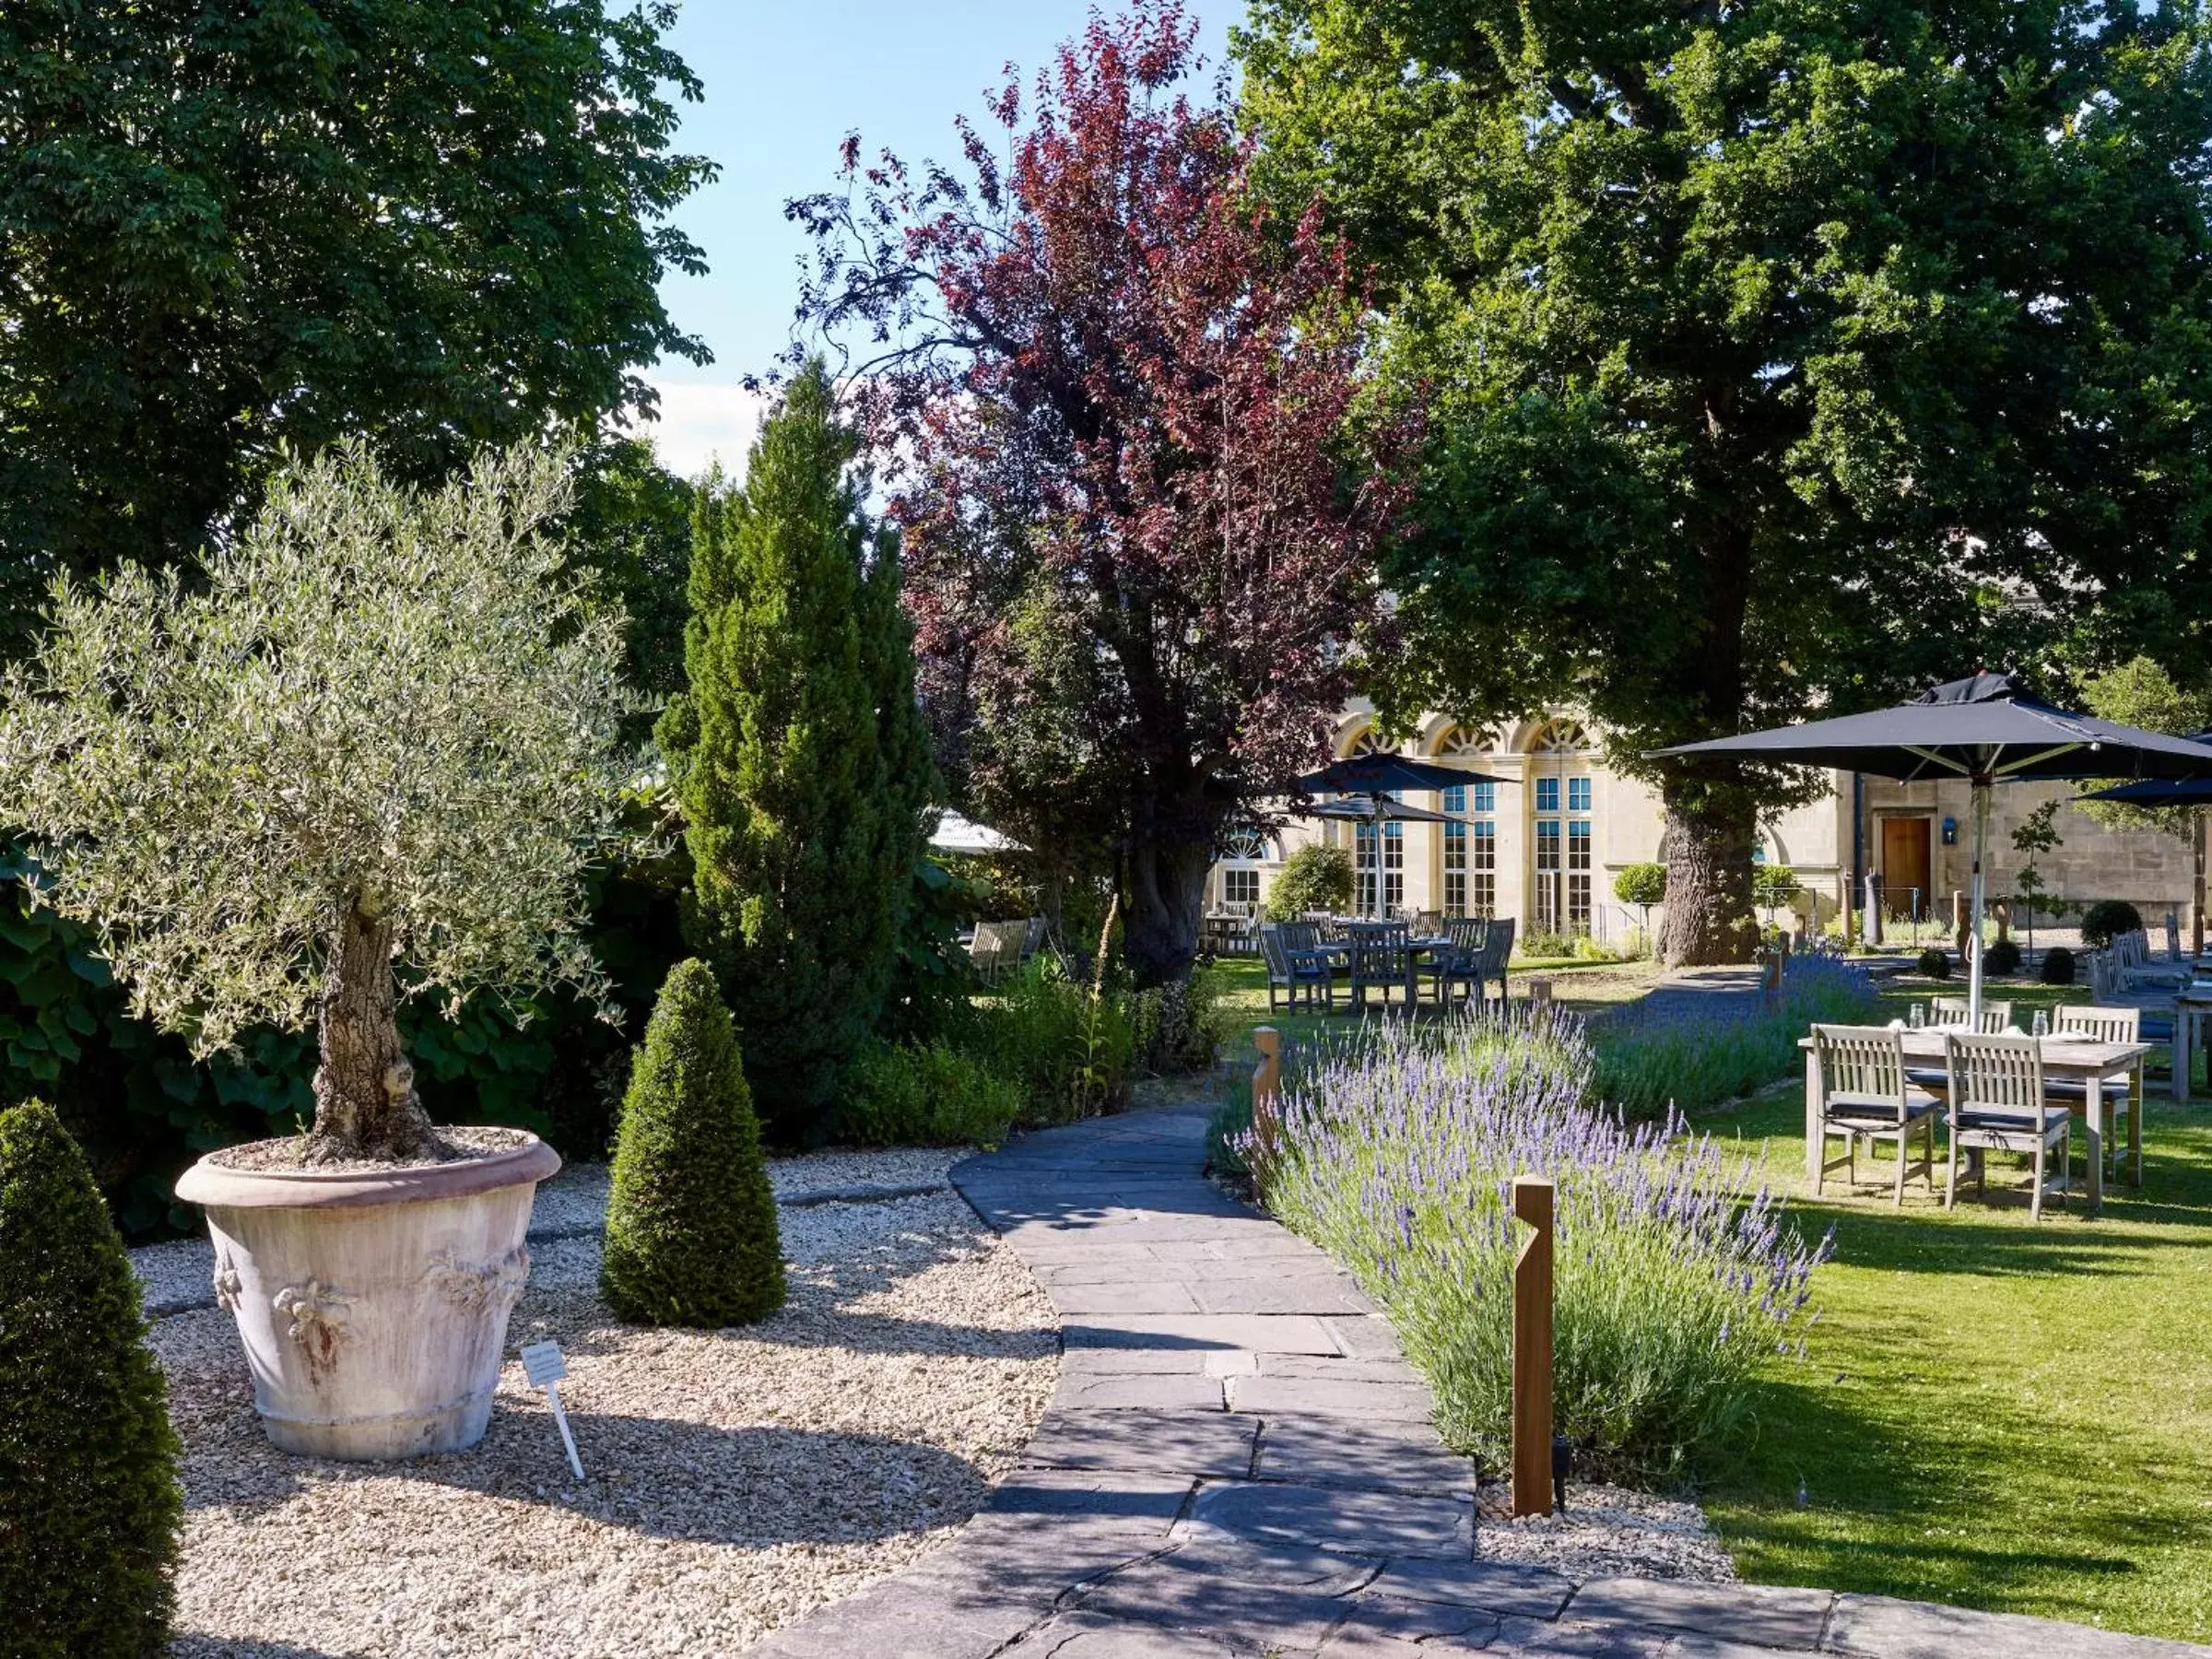 Garden in The Royal Crescent Hotel & Spa